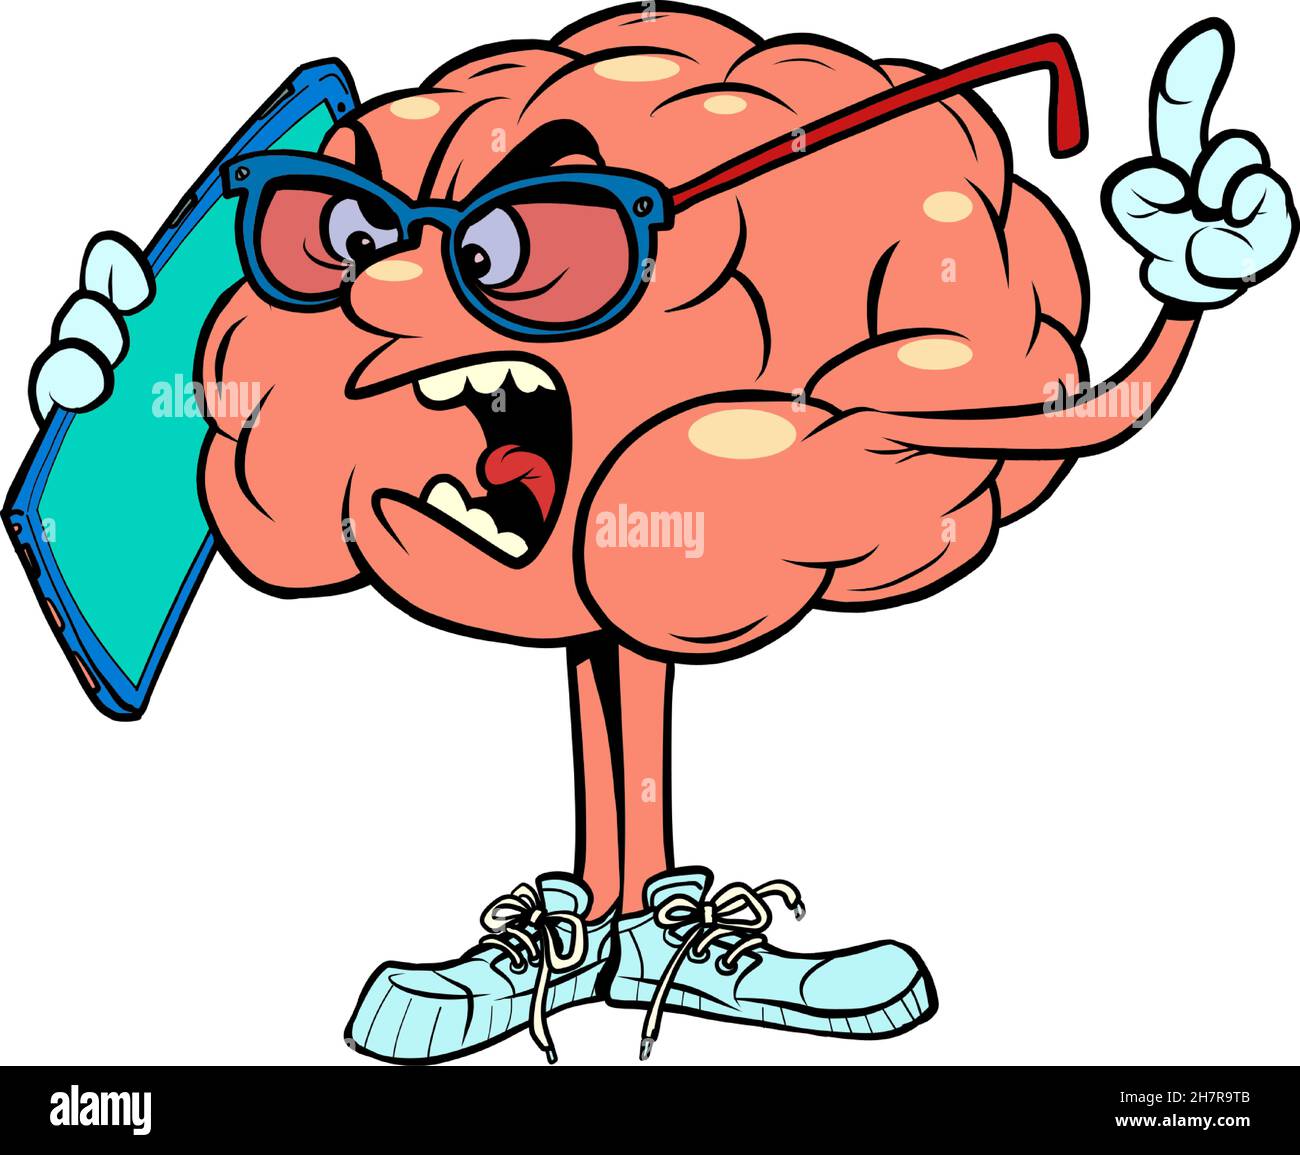 serious business negotiations by phone human brain character, smart wise Stock Vector